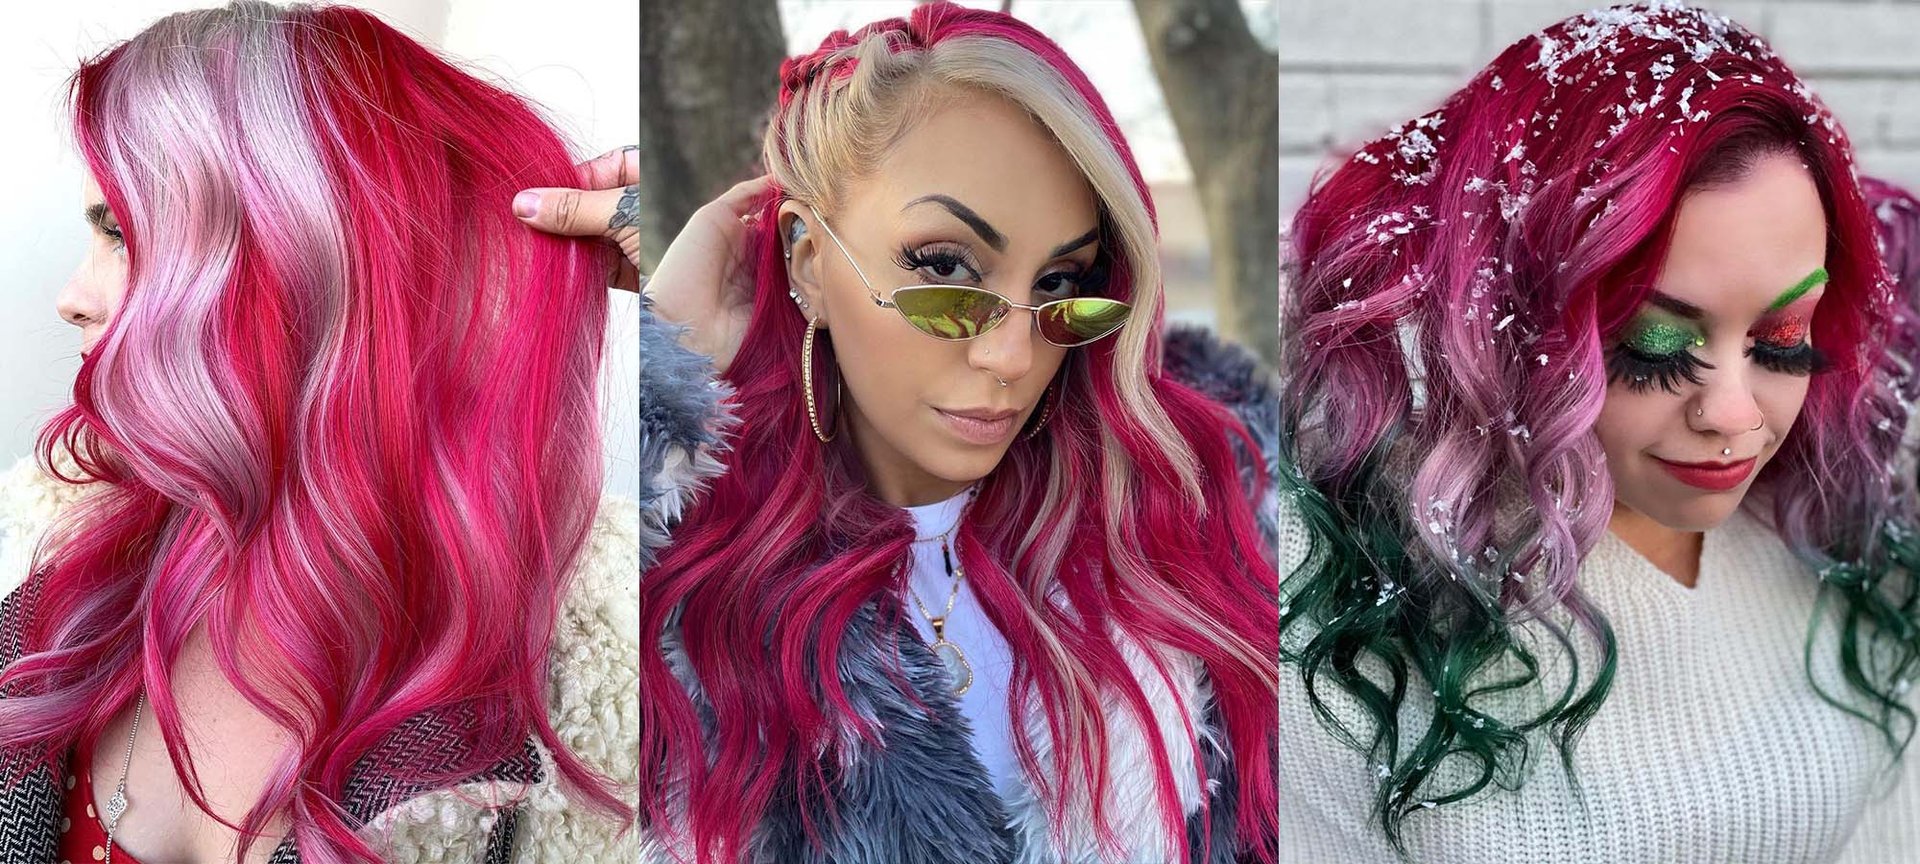 Blonde Hair Colors That Will Make You Stand Out This Christmas - wide 2